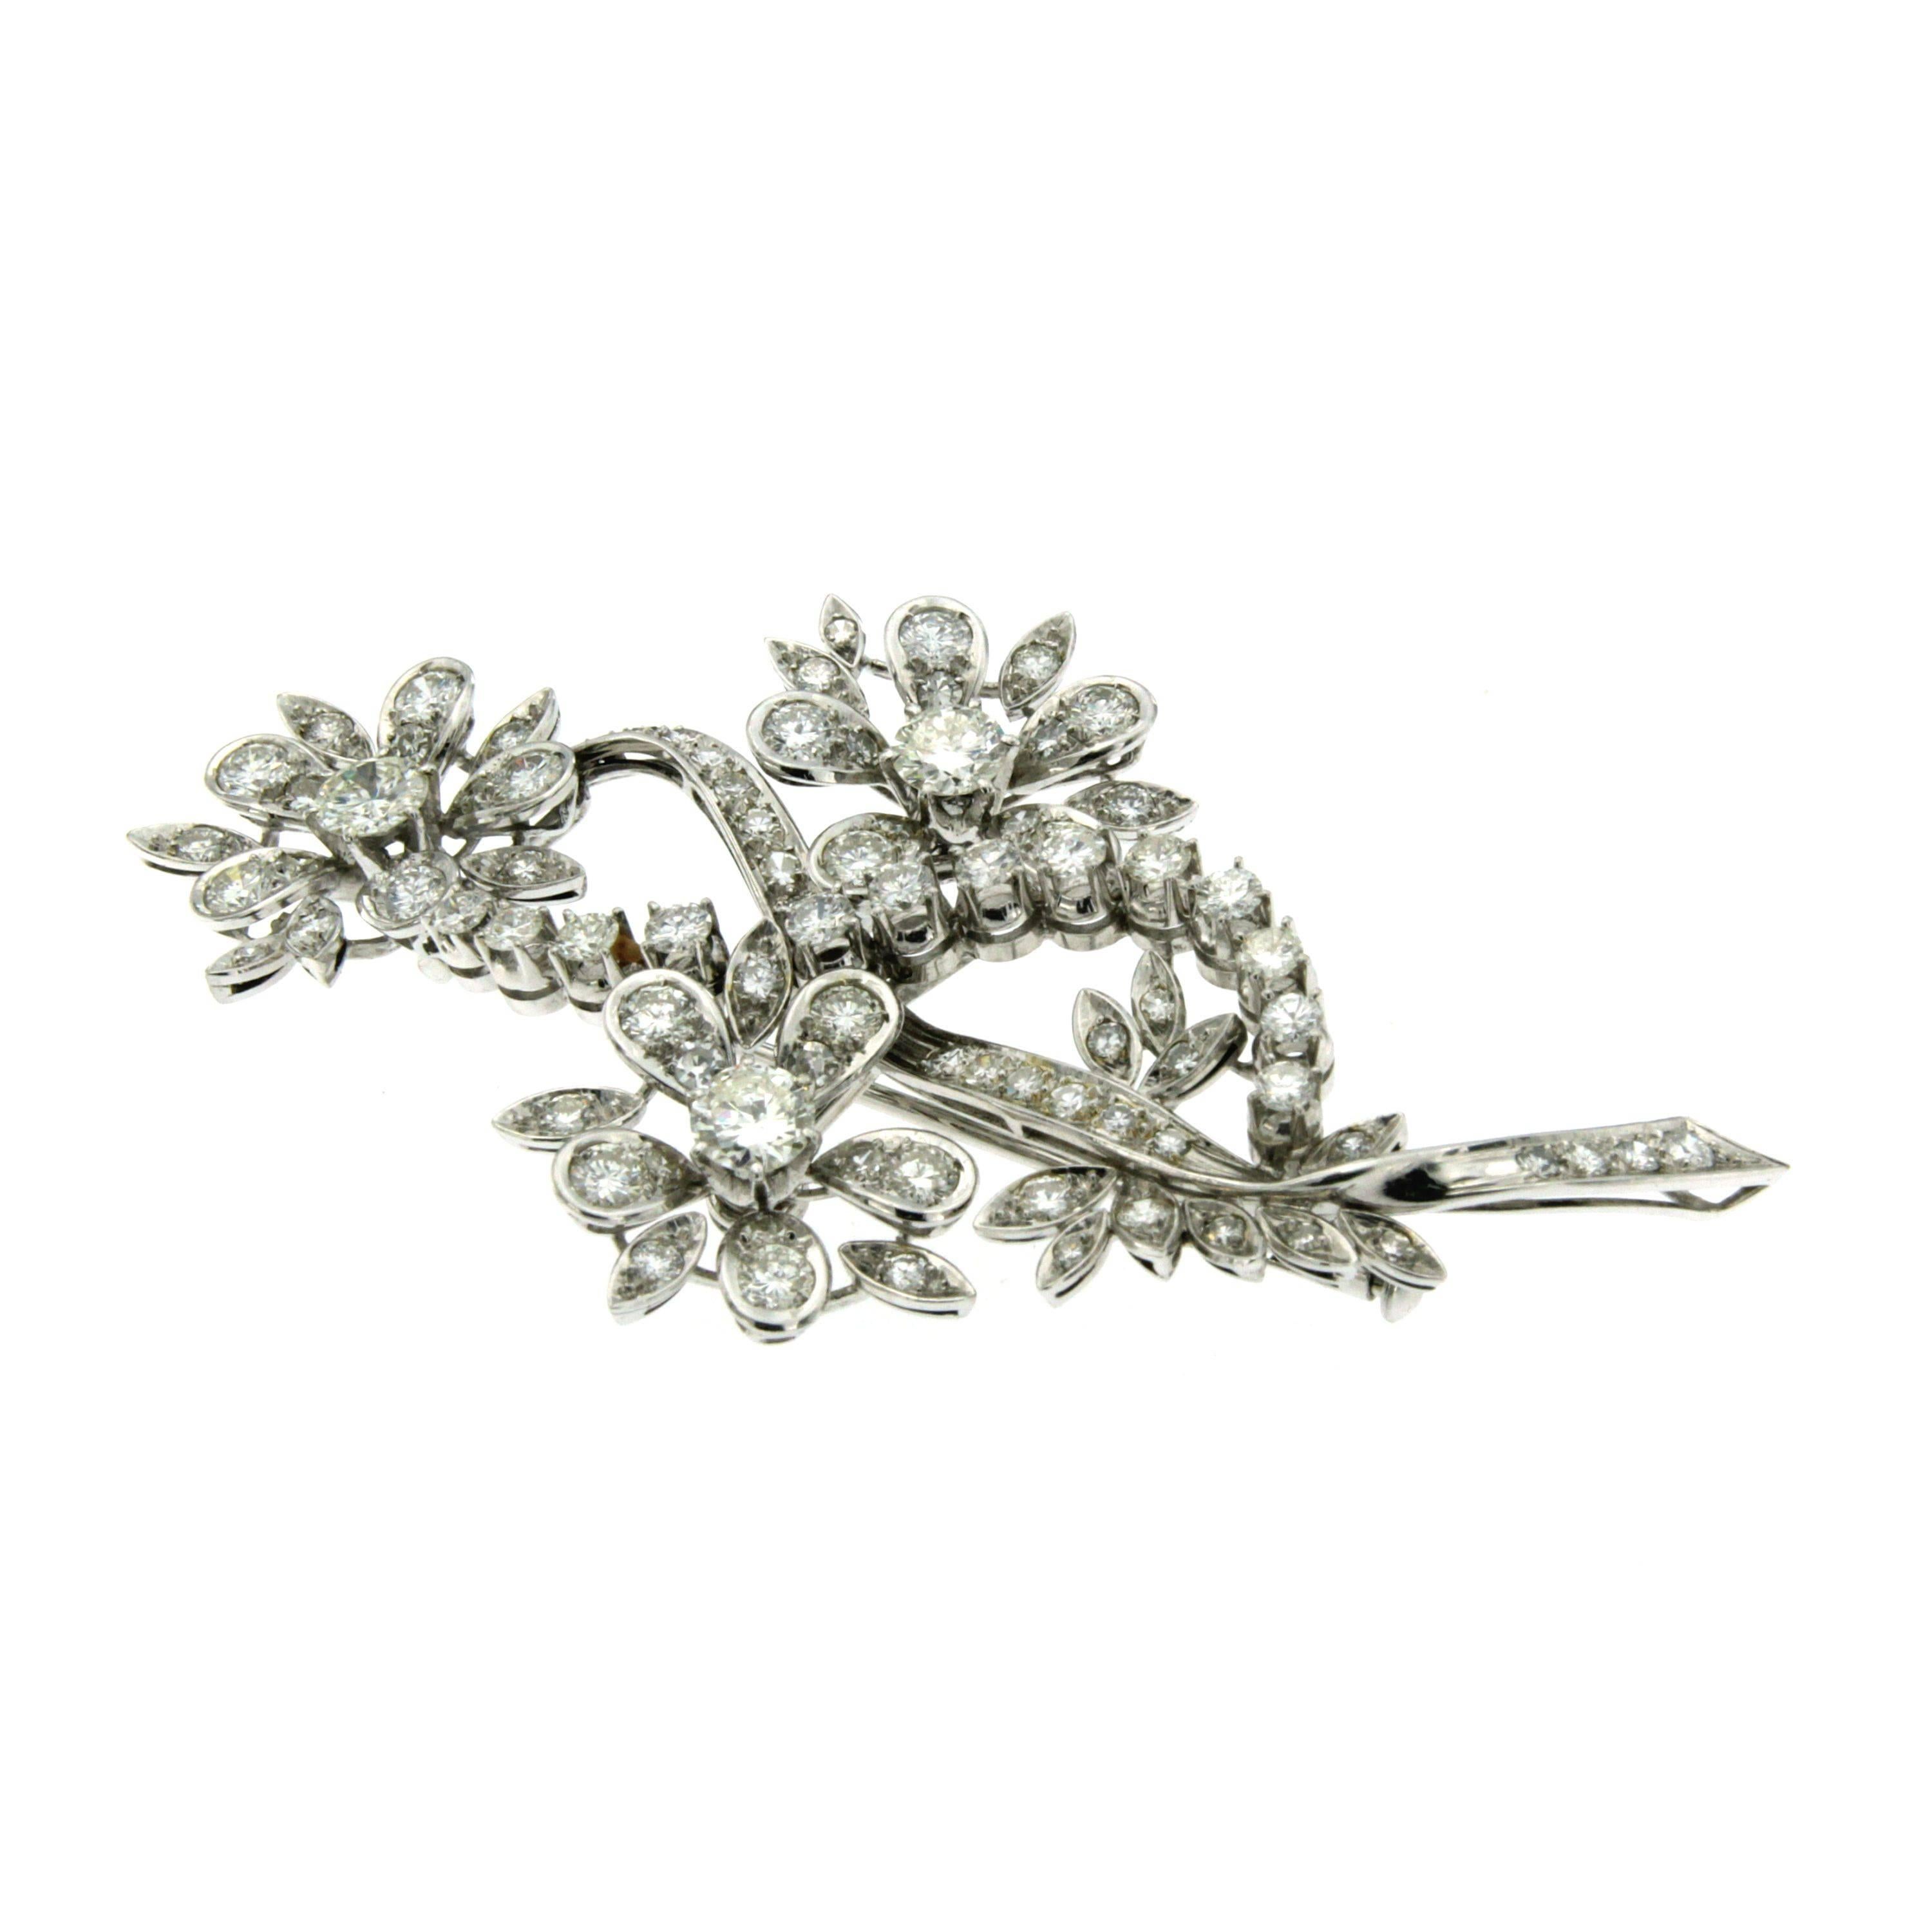 Italian Handcraft Flower Brooch with approximately 5 ct F/VVS of round brilliant cut diamonds, mounted in 18k white gold.
The clasp is a pin with a safety pump. Circa 1940

CONDITION:Pre-owned - Excellent
METAL:18k White Gold
GEM STONE: Diamond